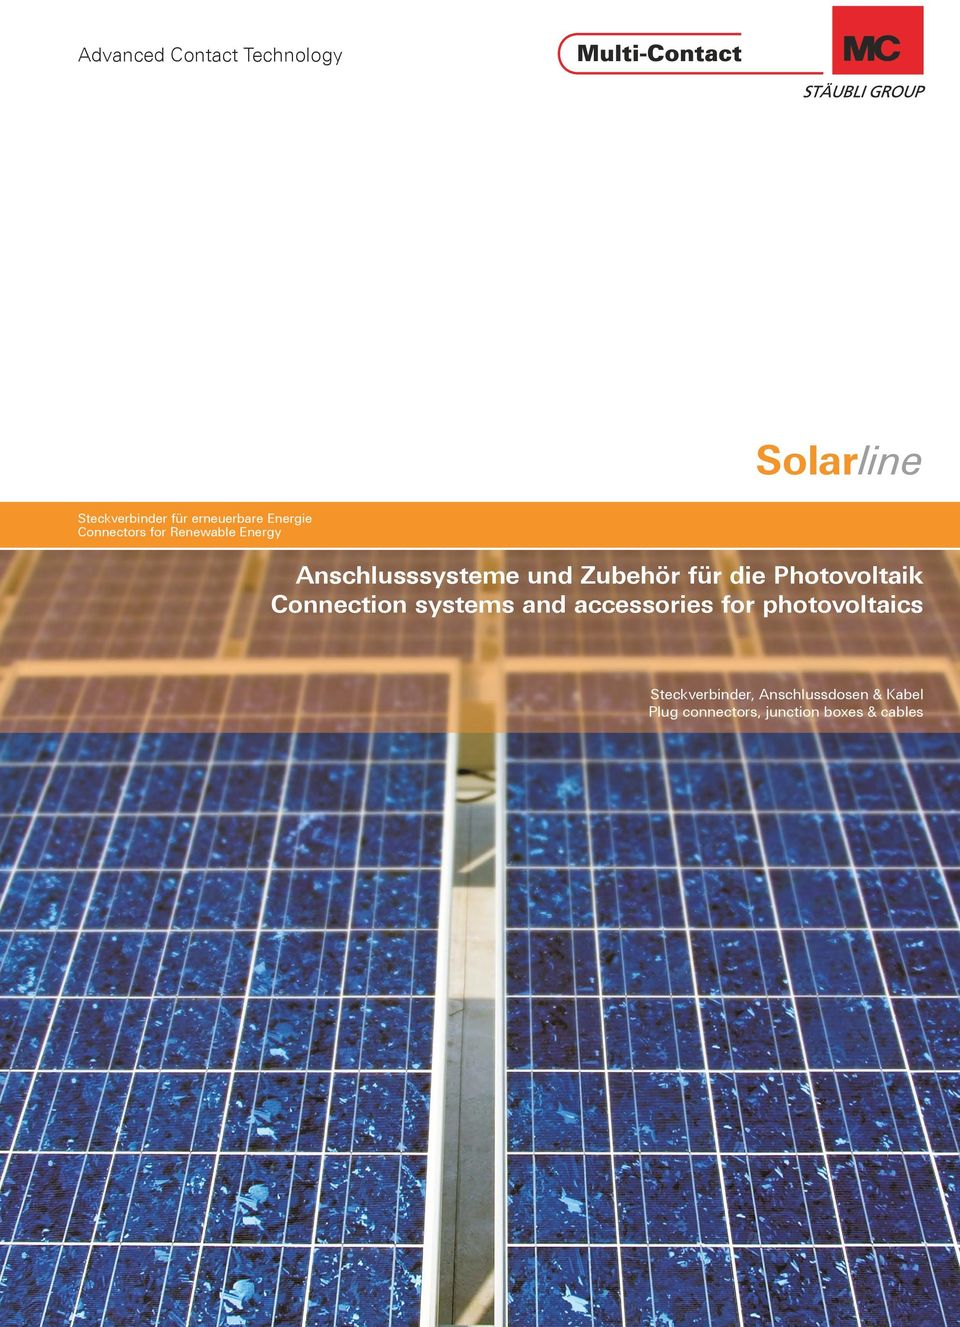 Connection systems and accessories for photovoltaics